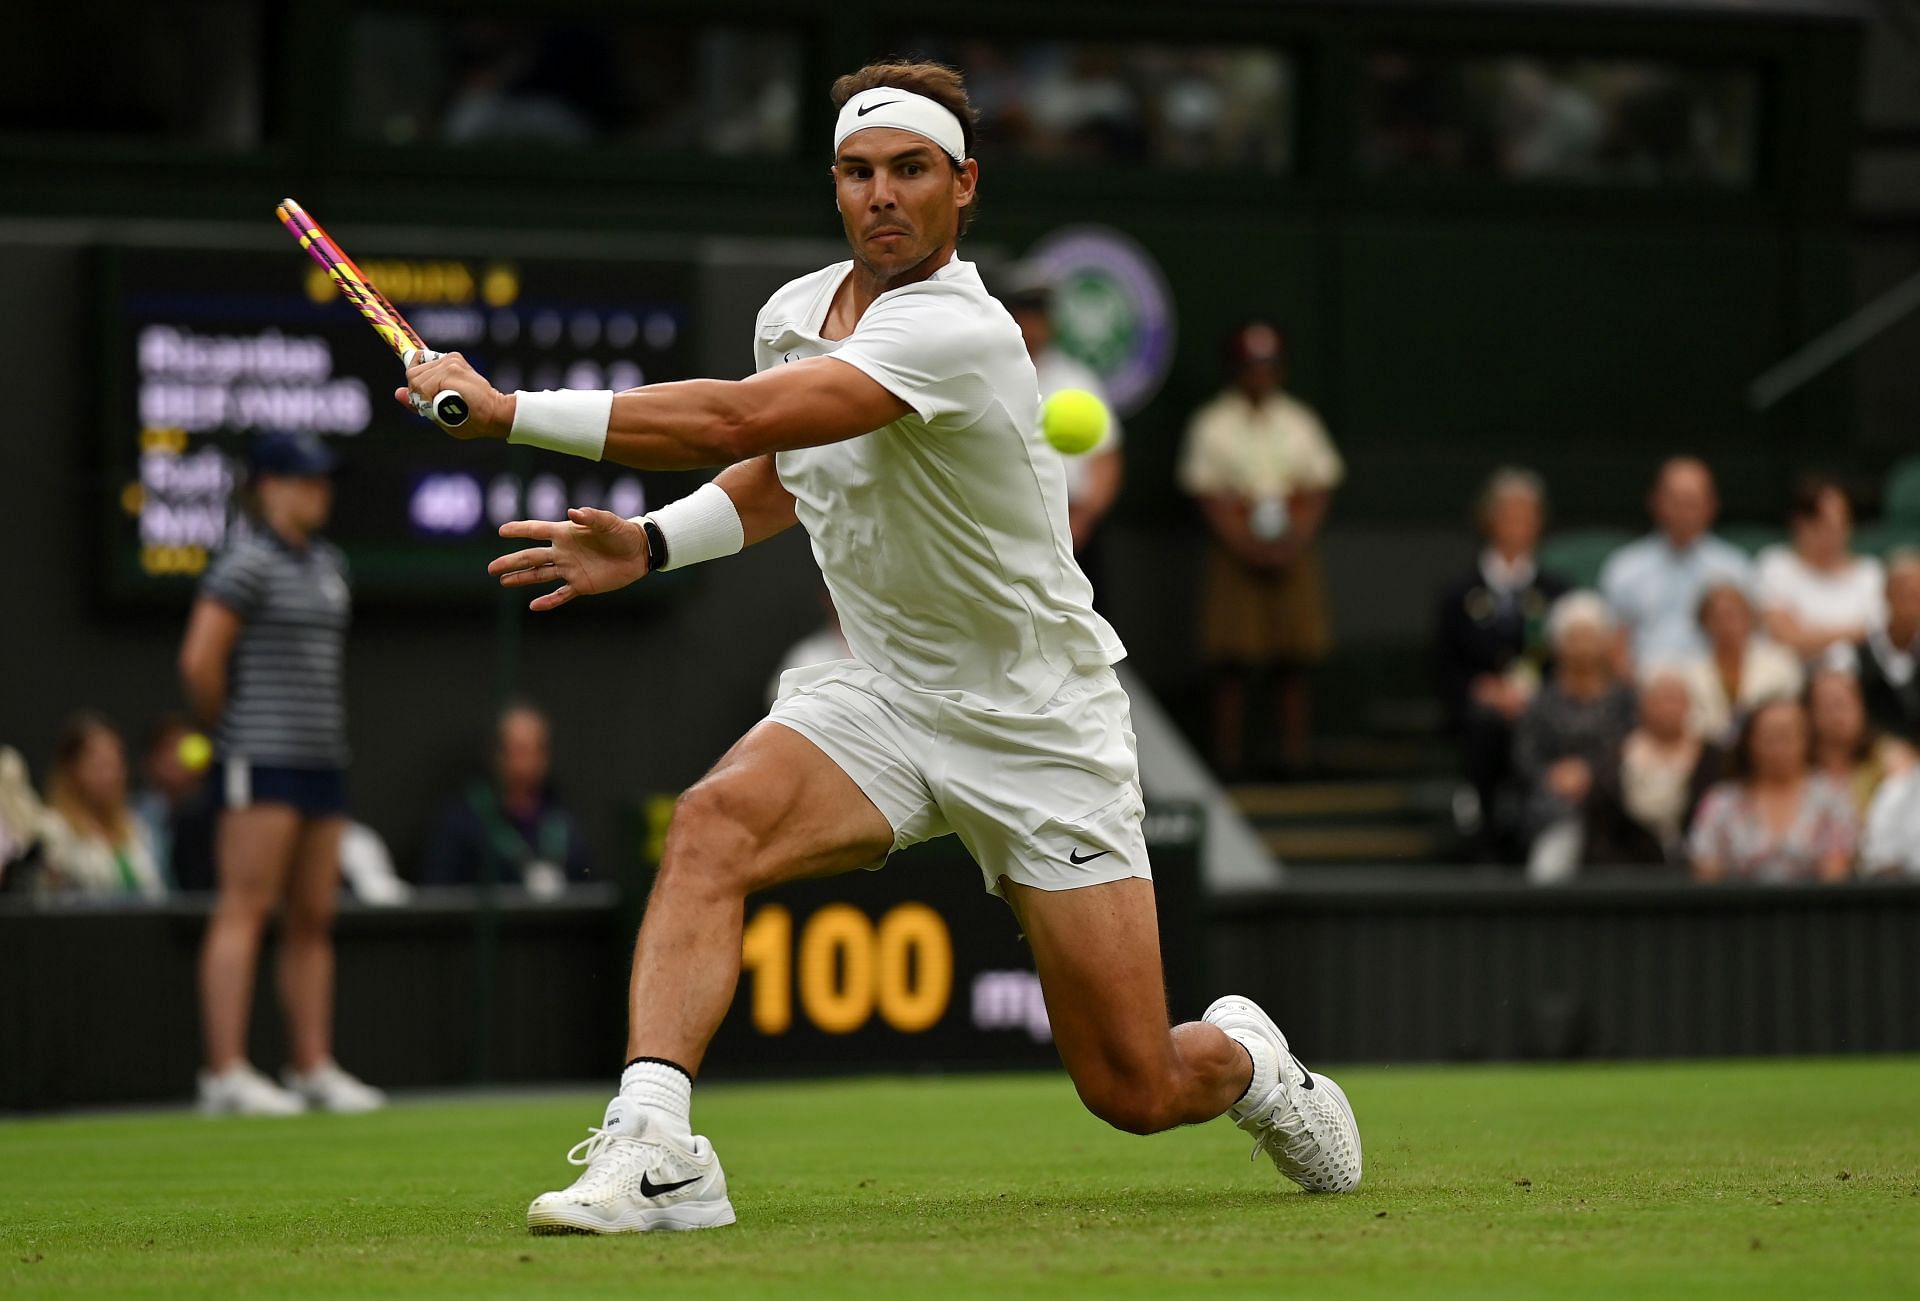 Rafael Nadal and Lorenzo Sonego to clash in the third round at Wimbledon